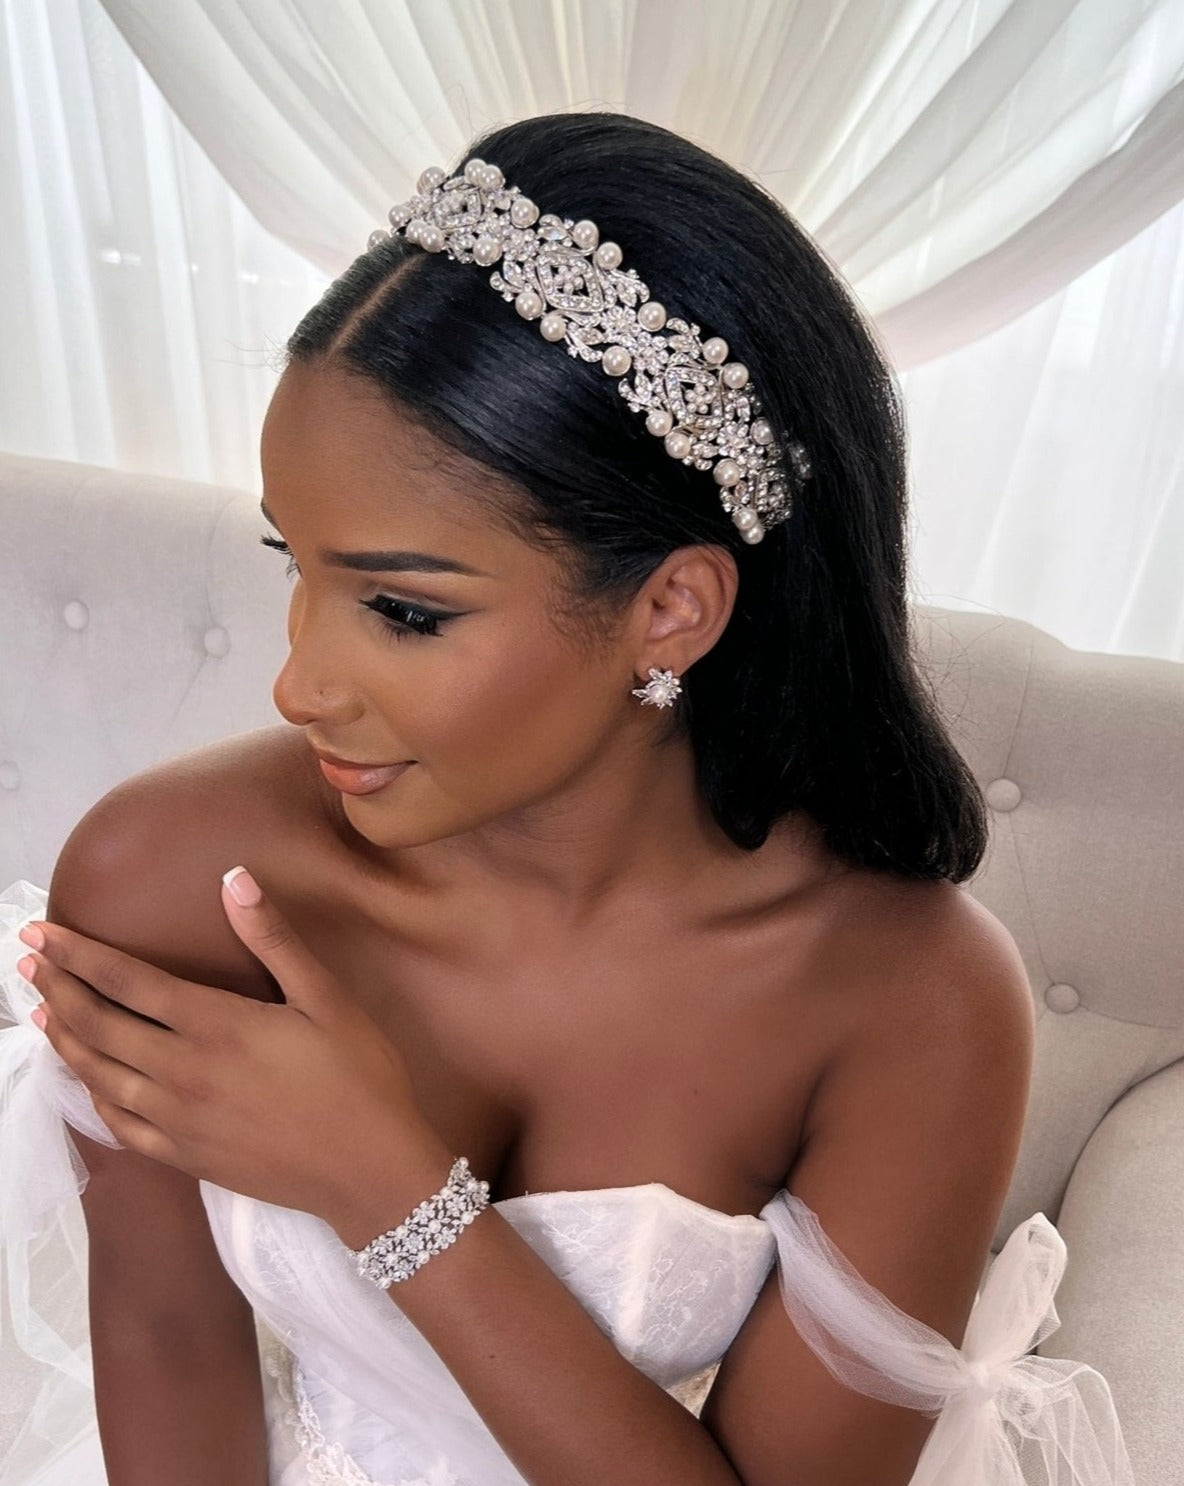 female model wearing silver bridal headband with swirling floral details embellished with crystal and pearl